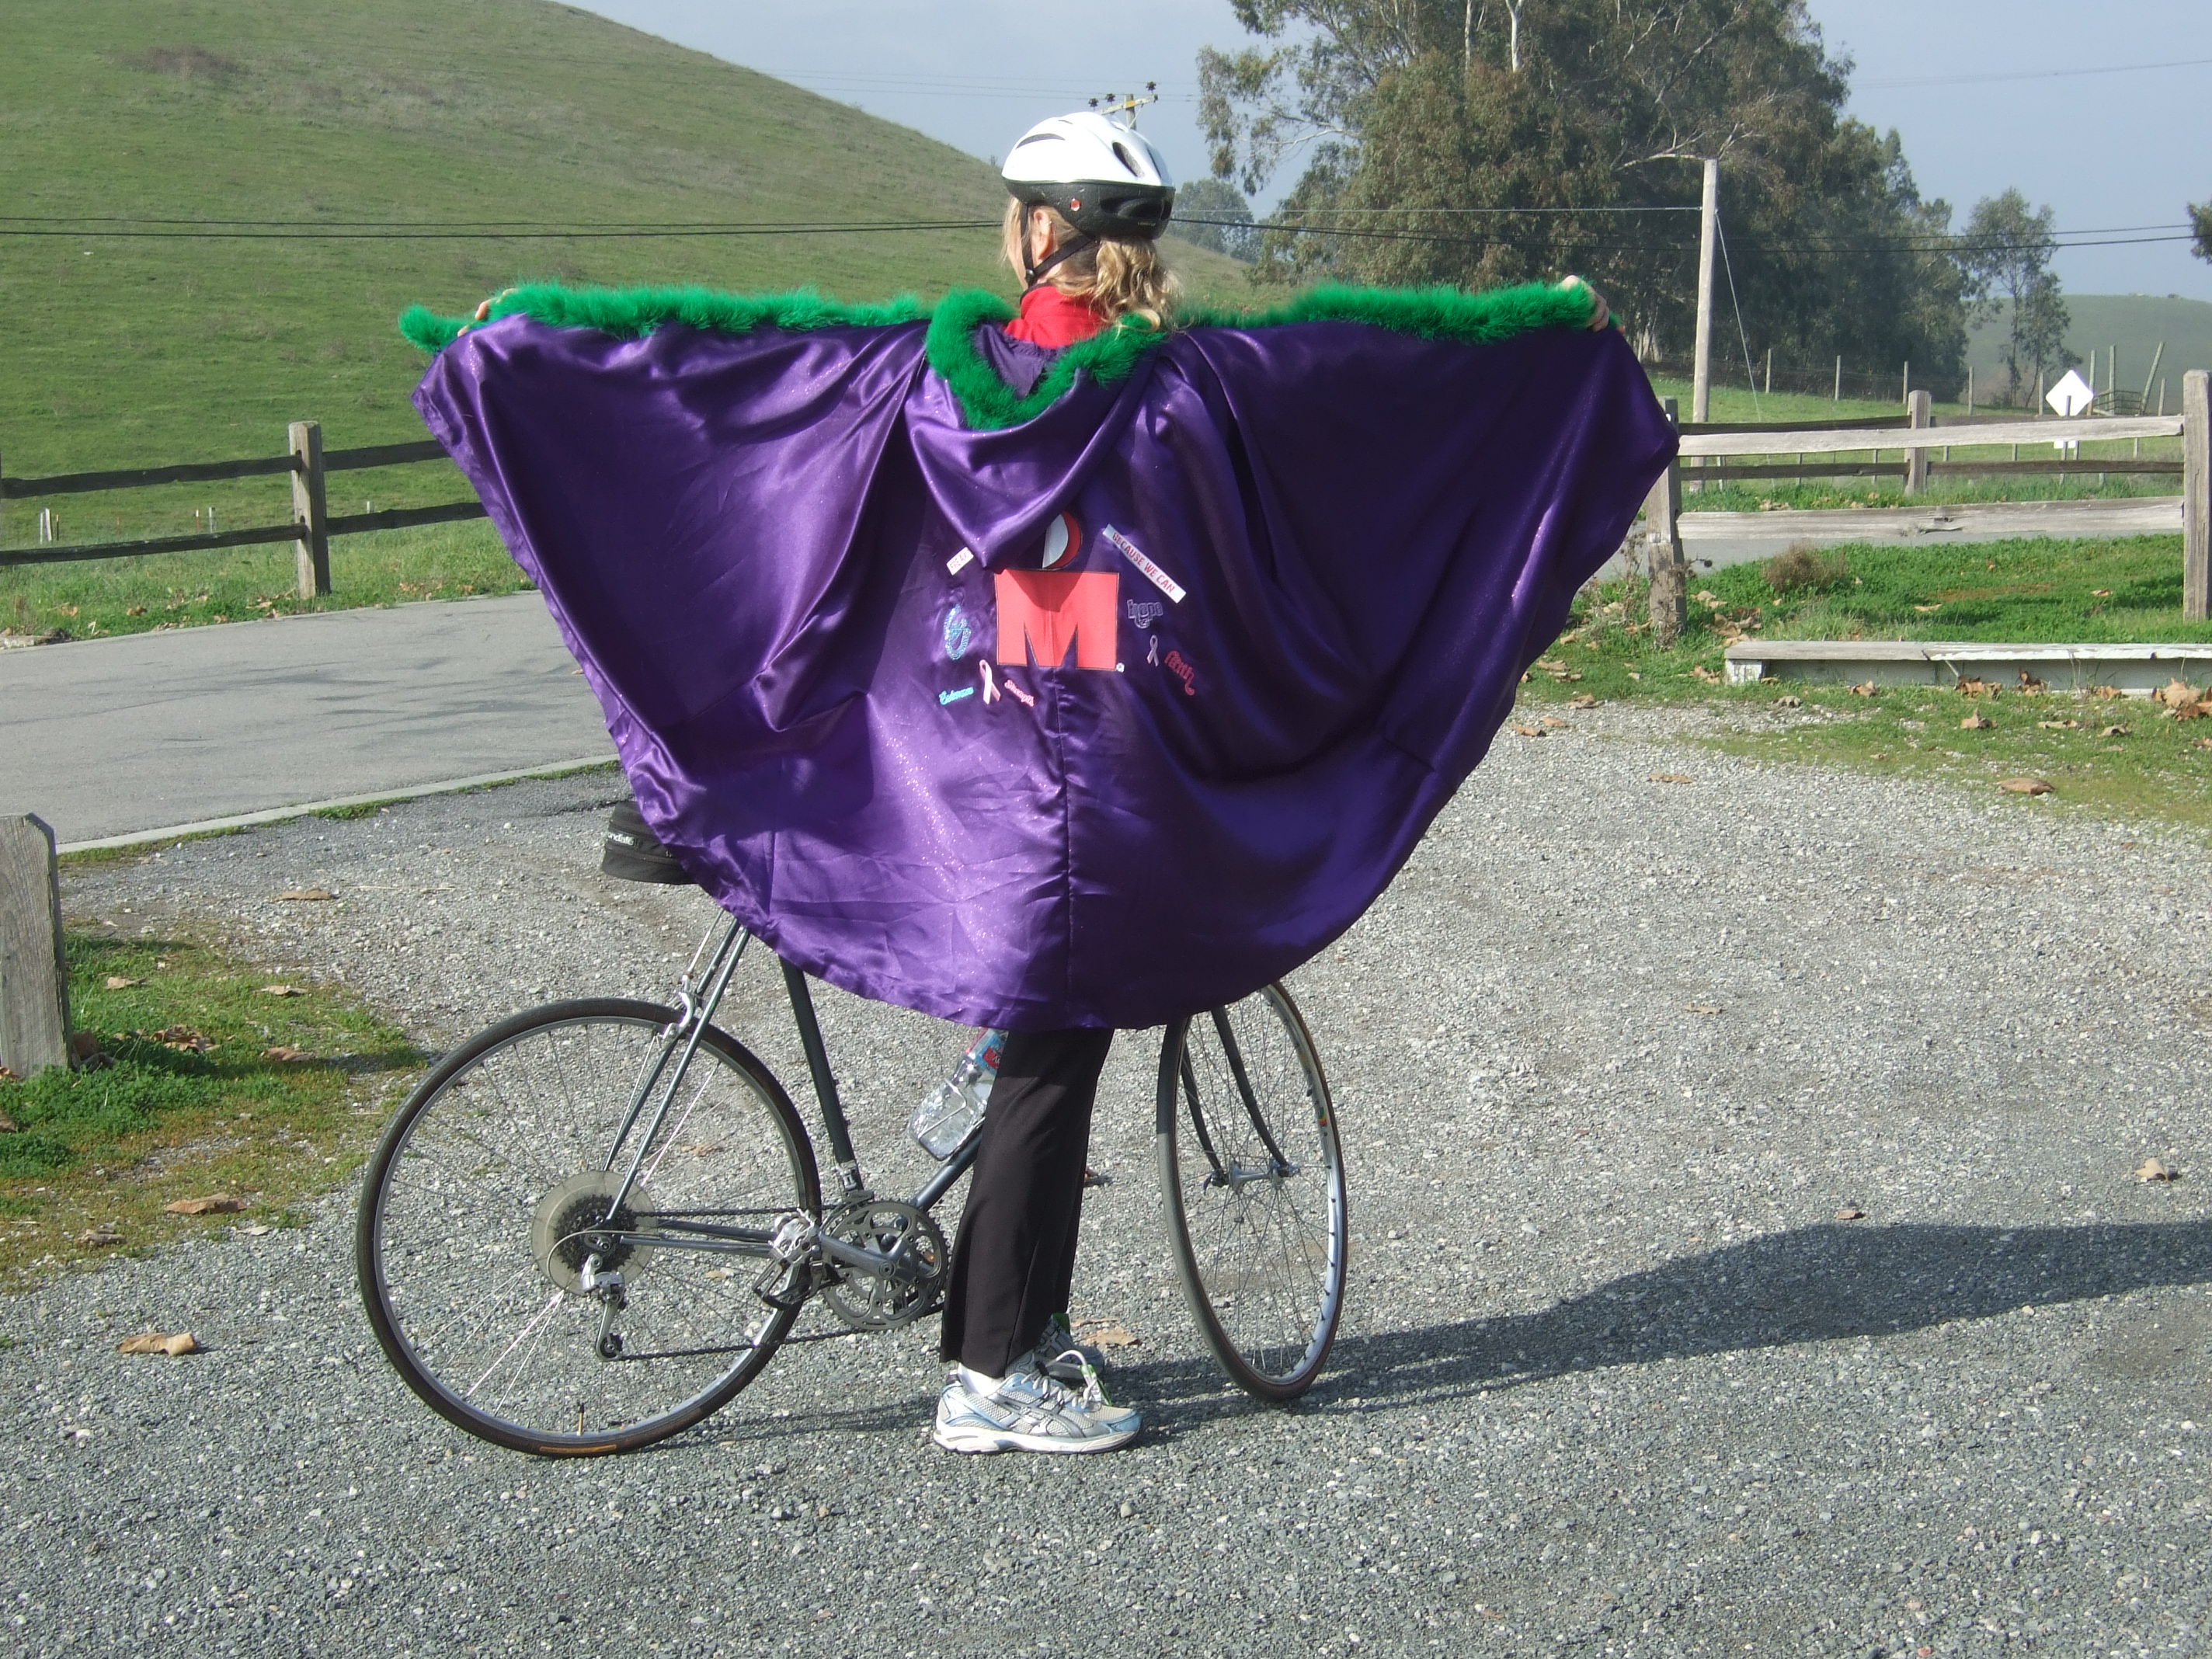 the spirit cape out in the Petaluma countryside.